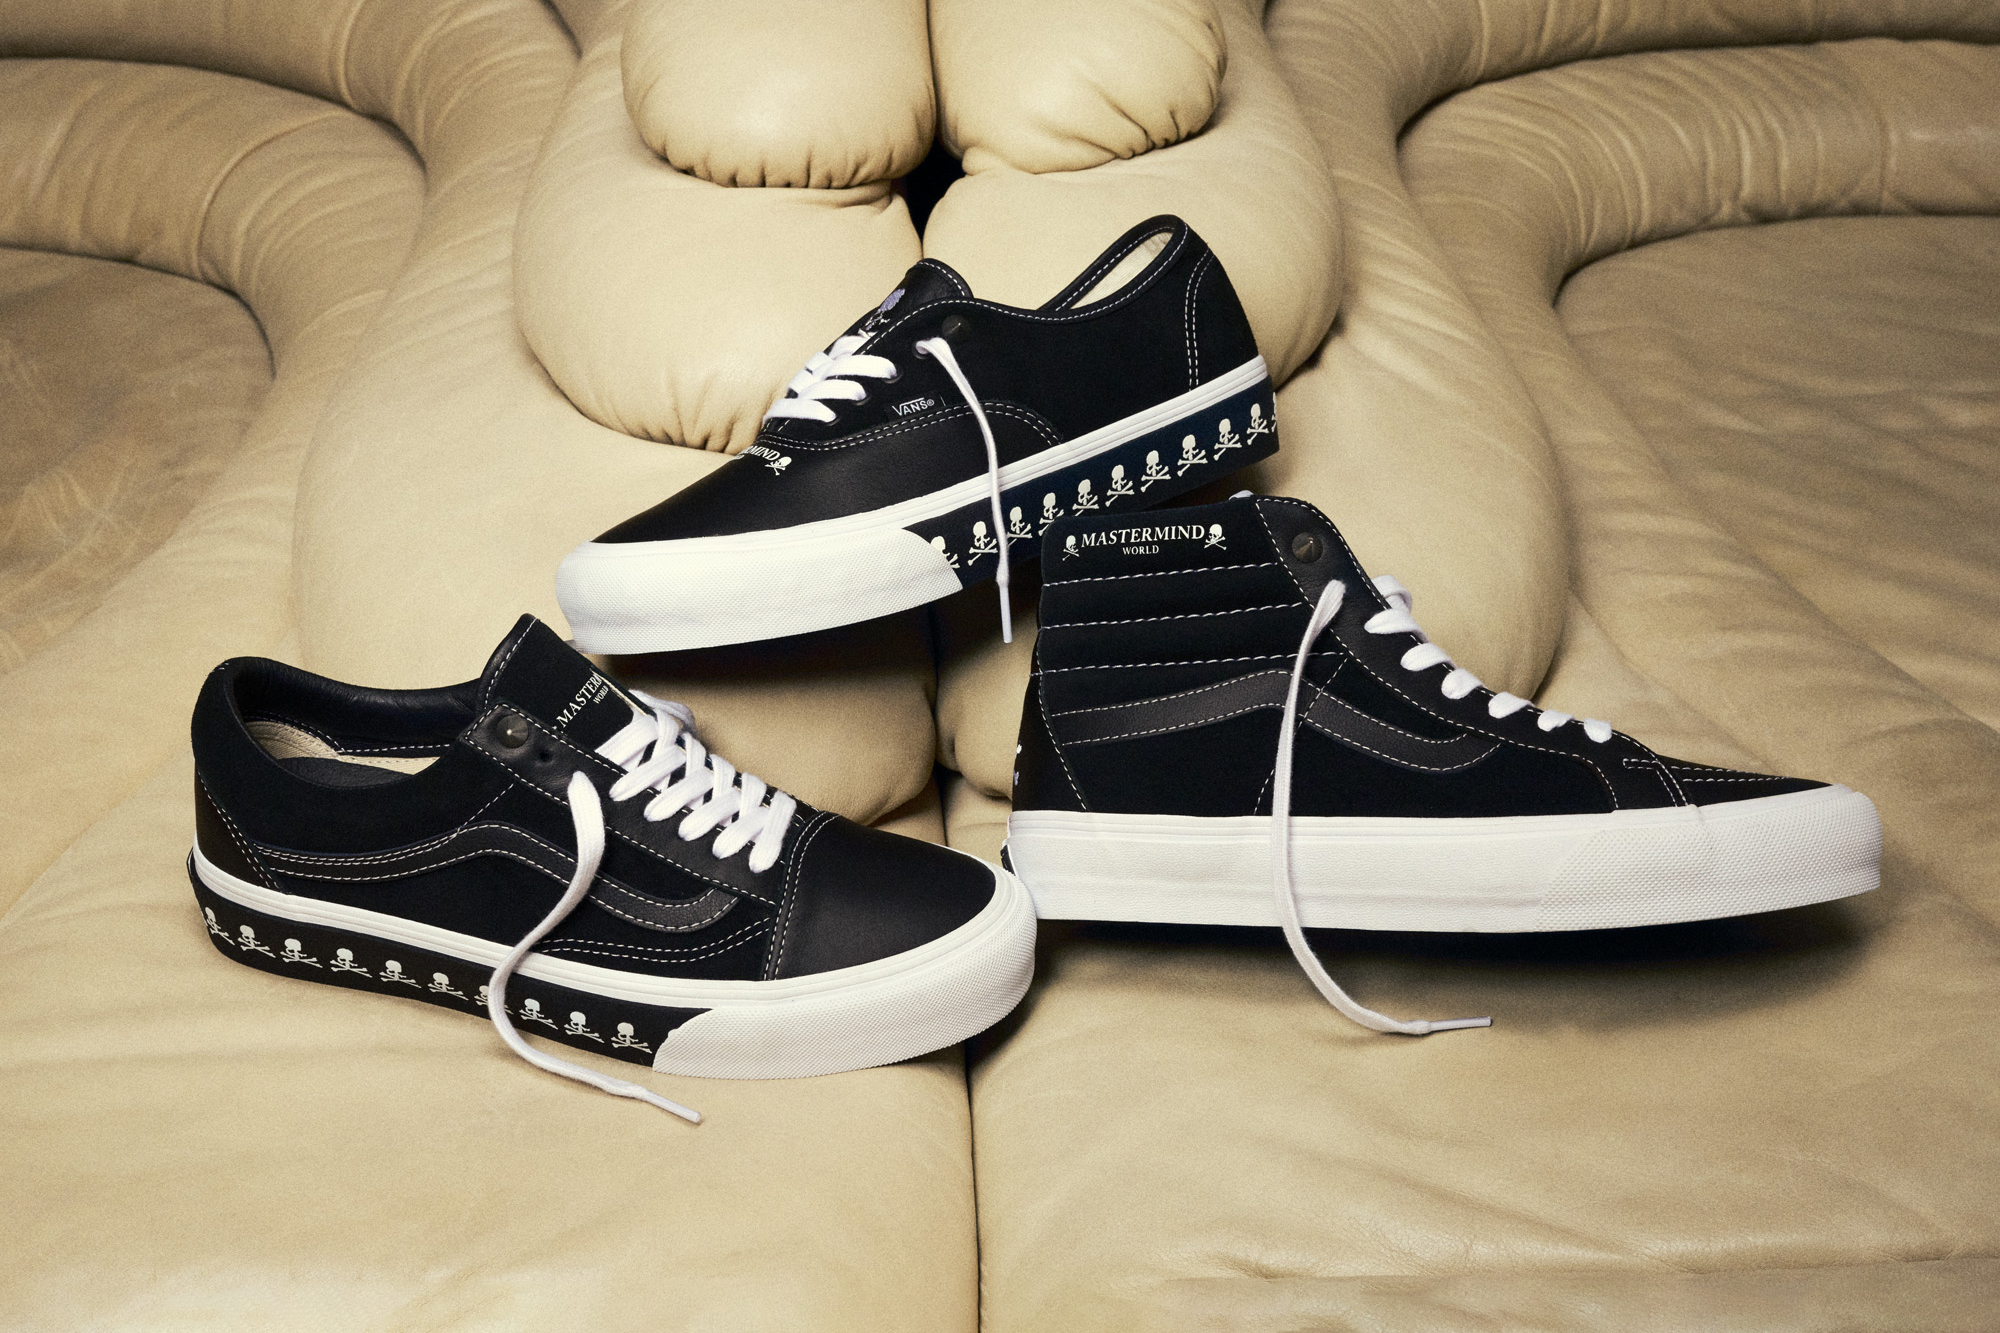 MASTERMIND WORLD & Vault by Vans Collide on a Footwear & Apparel Collection